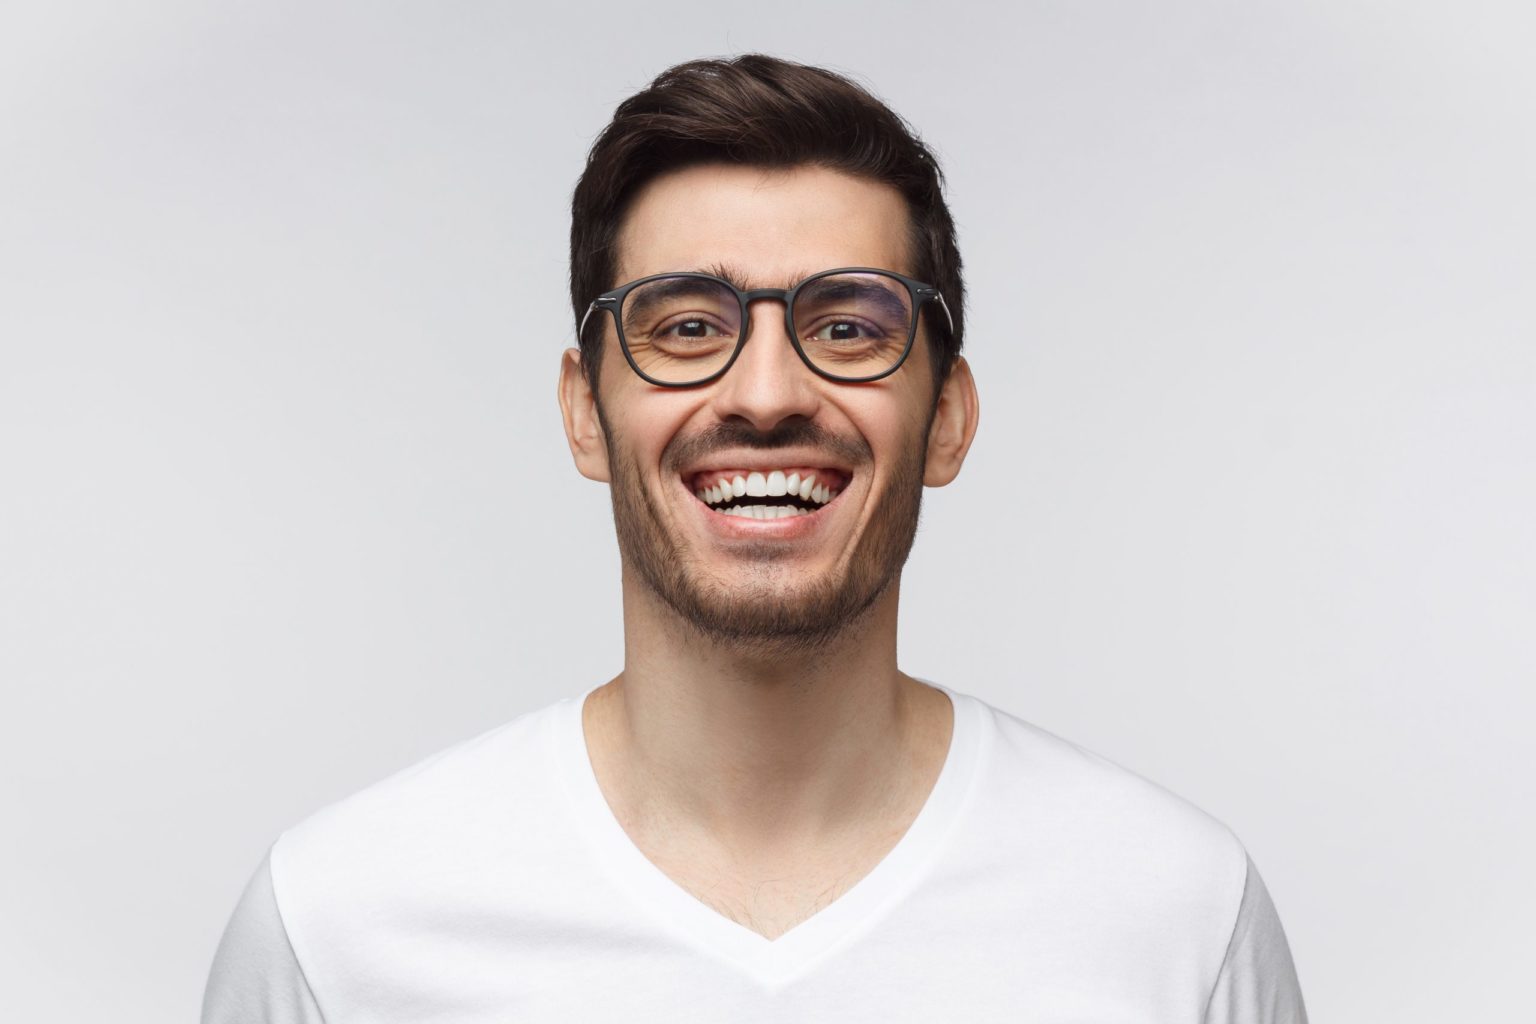 Laughing out loud. Joyful young man in casual t-shirt smiles broadly, laughing, showing perfect white teeth